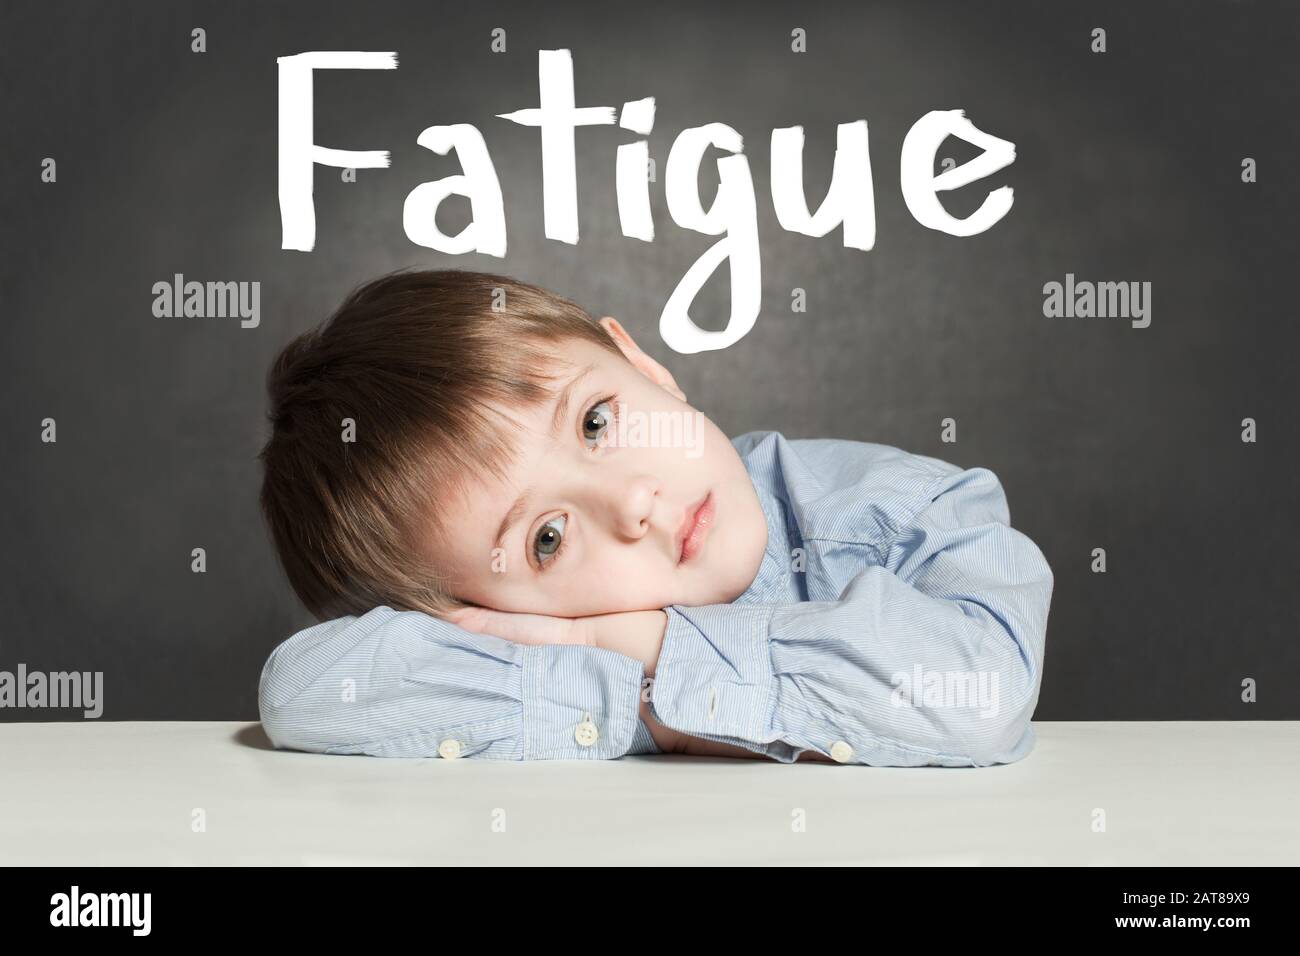 Tired sad child boy with fatigue Stock Photo